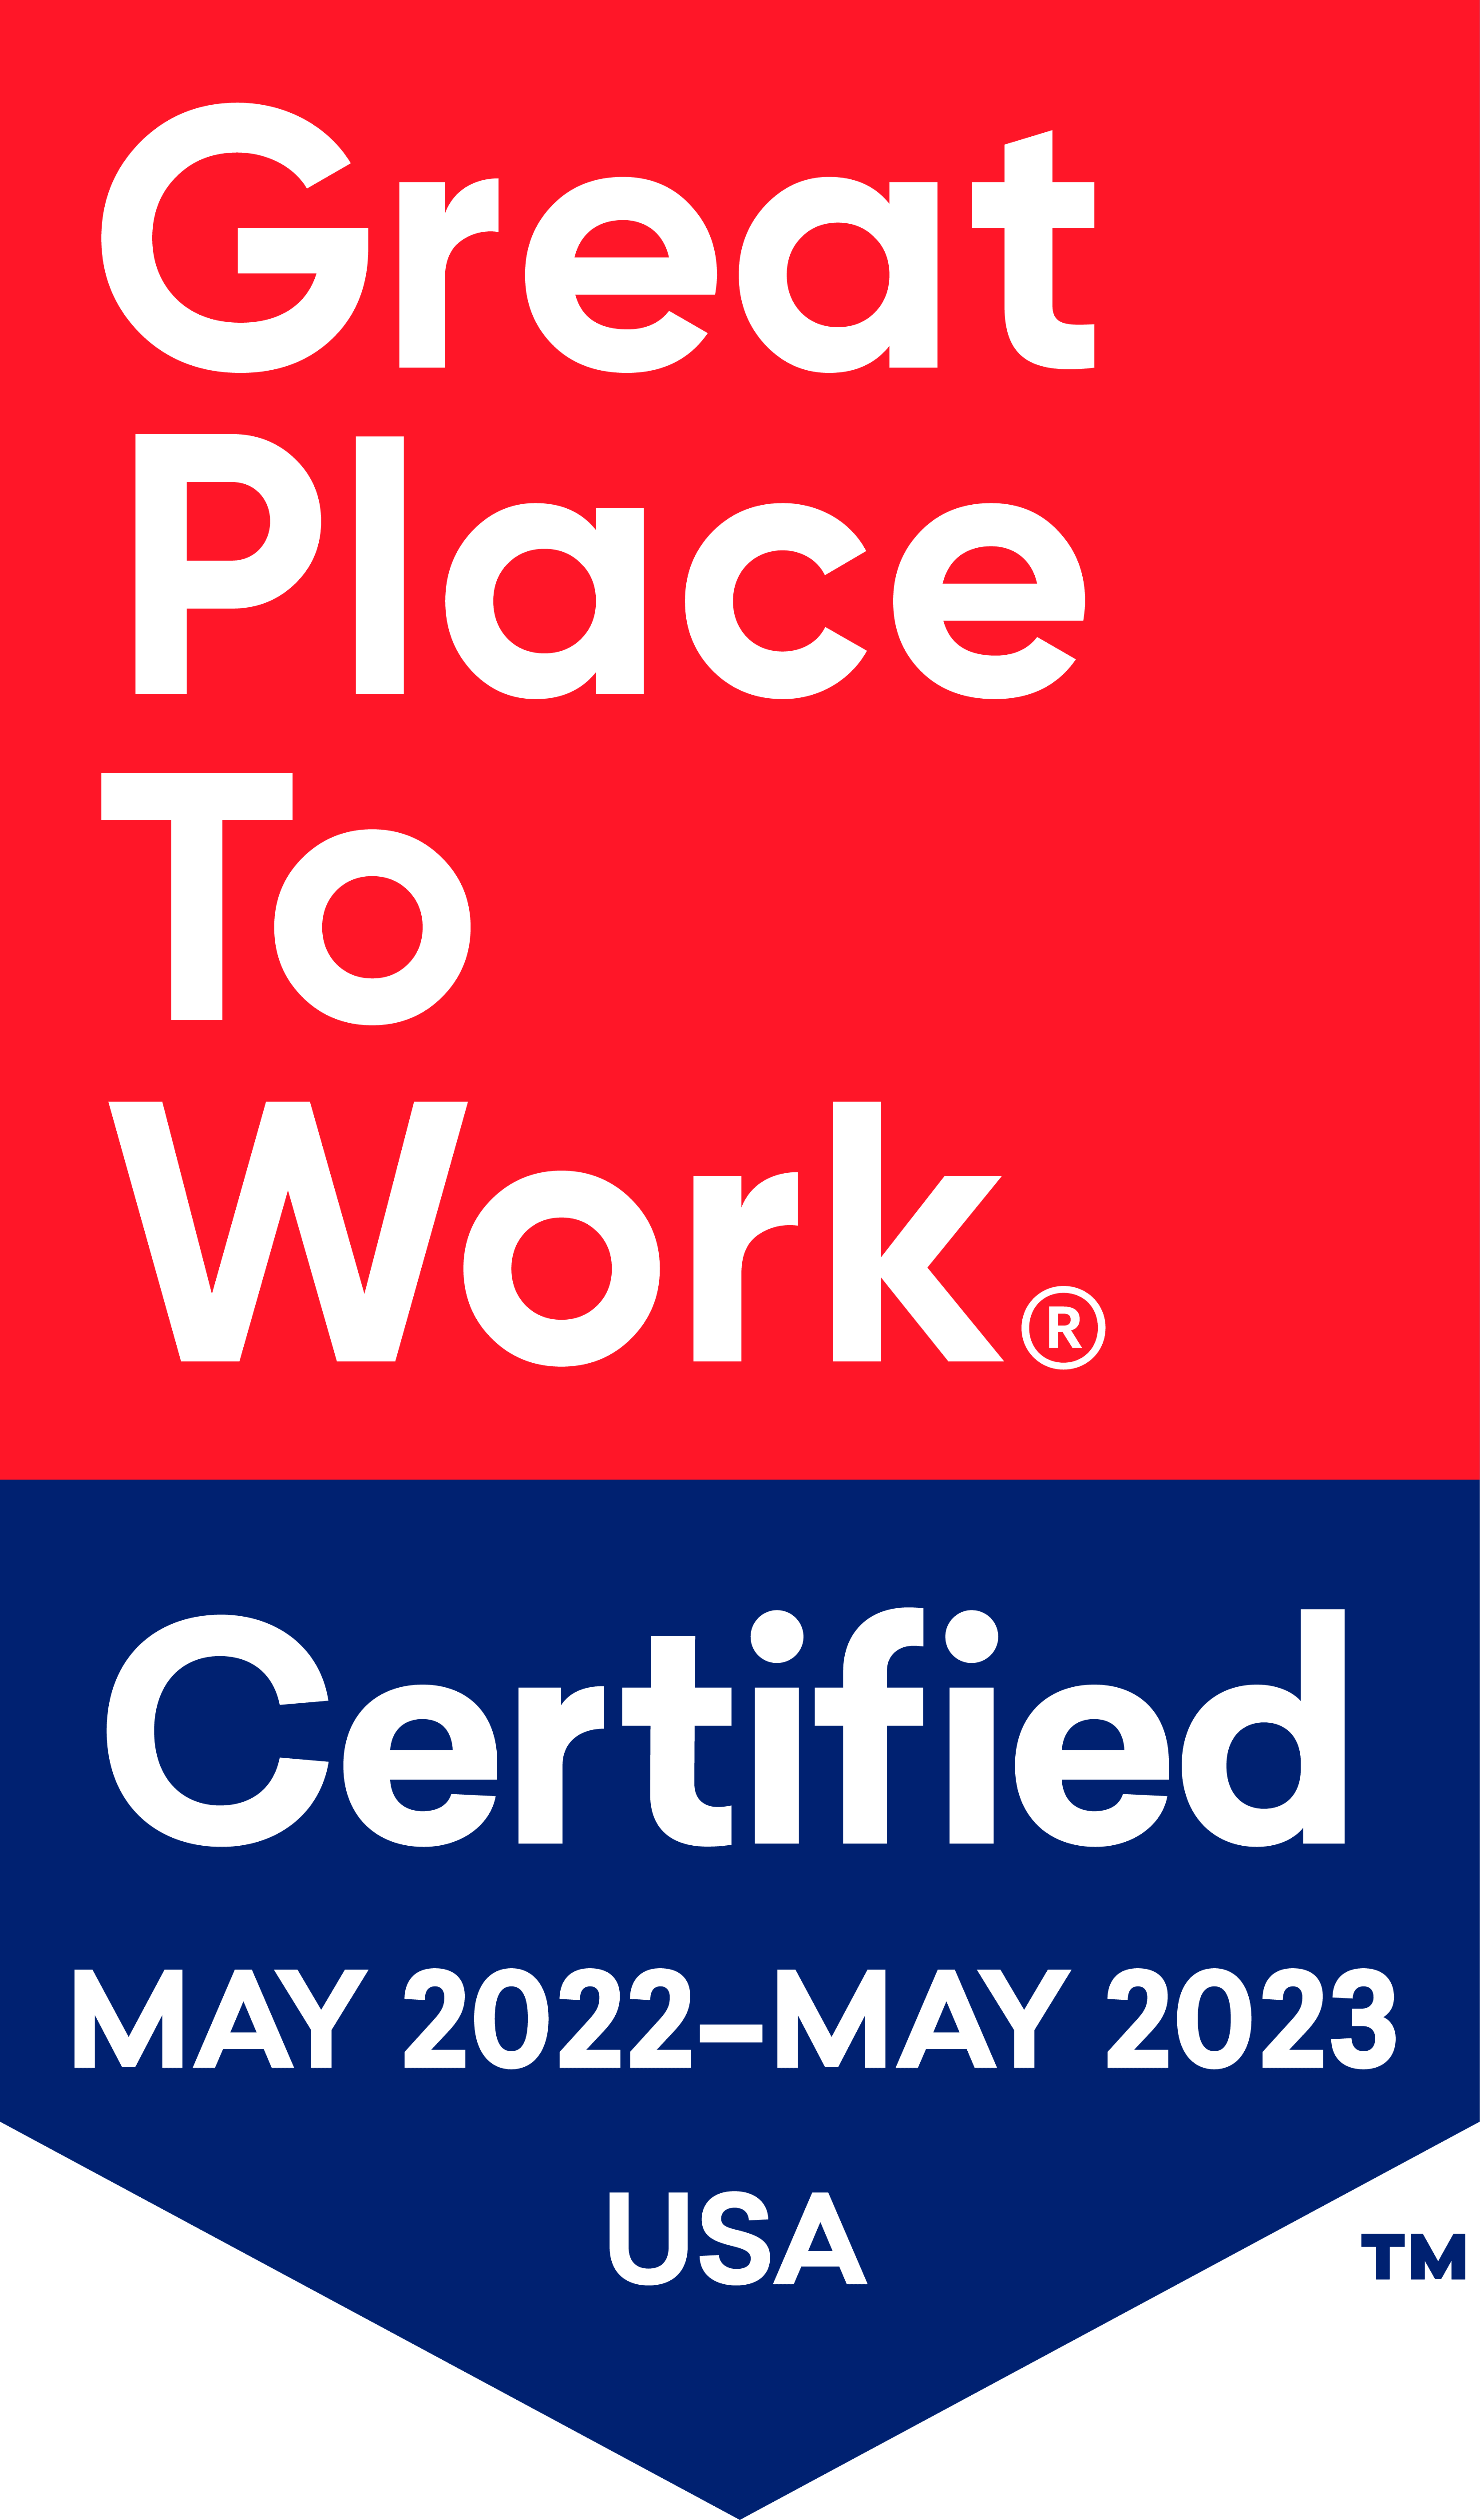 Hillcrest of Loveland is Great Place To Work Certified